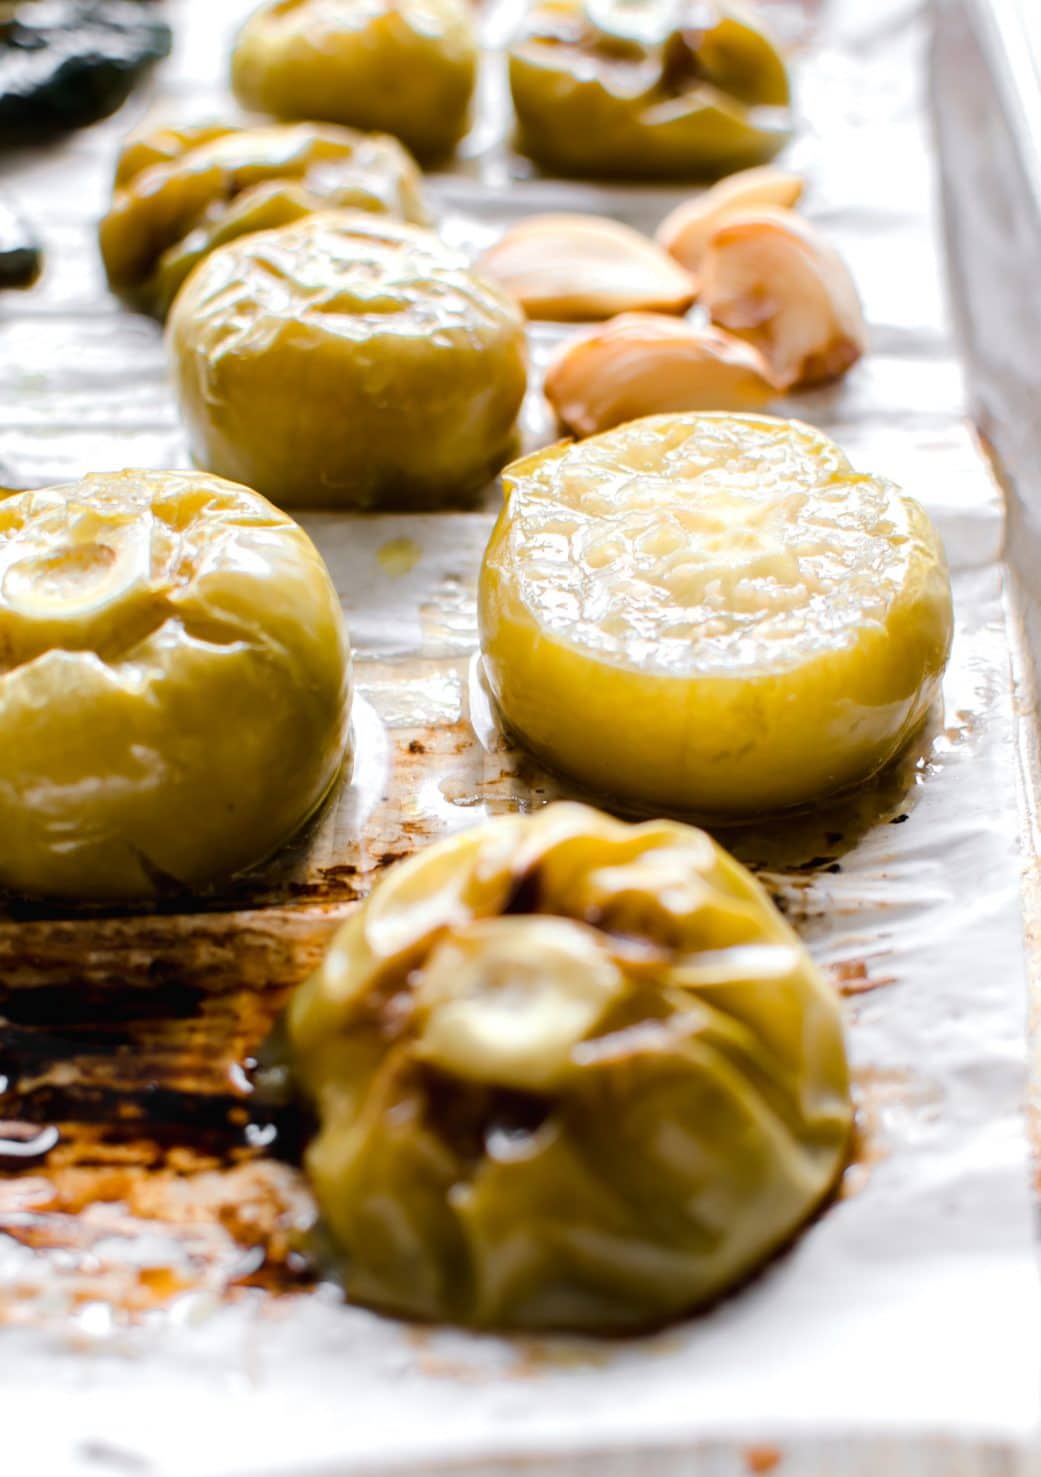 A close up of roasted tomatillos.